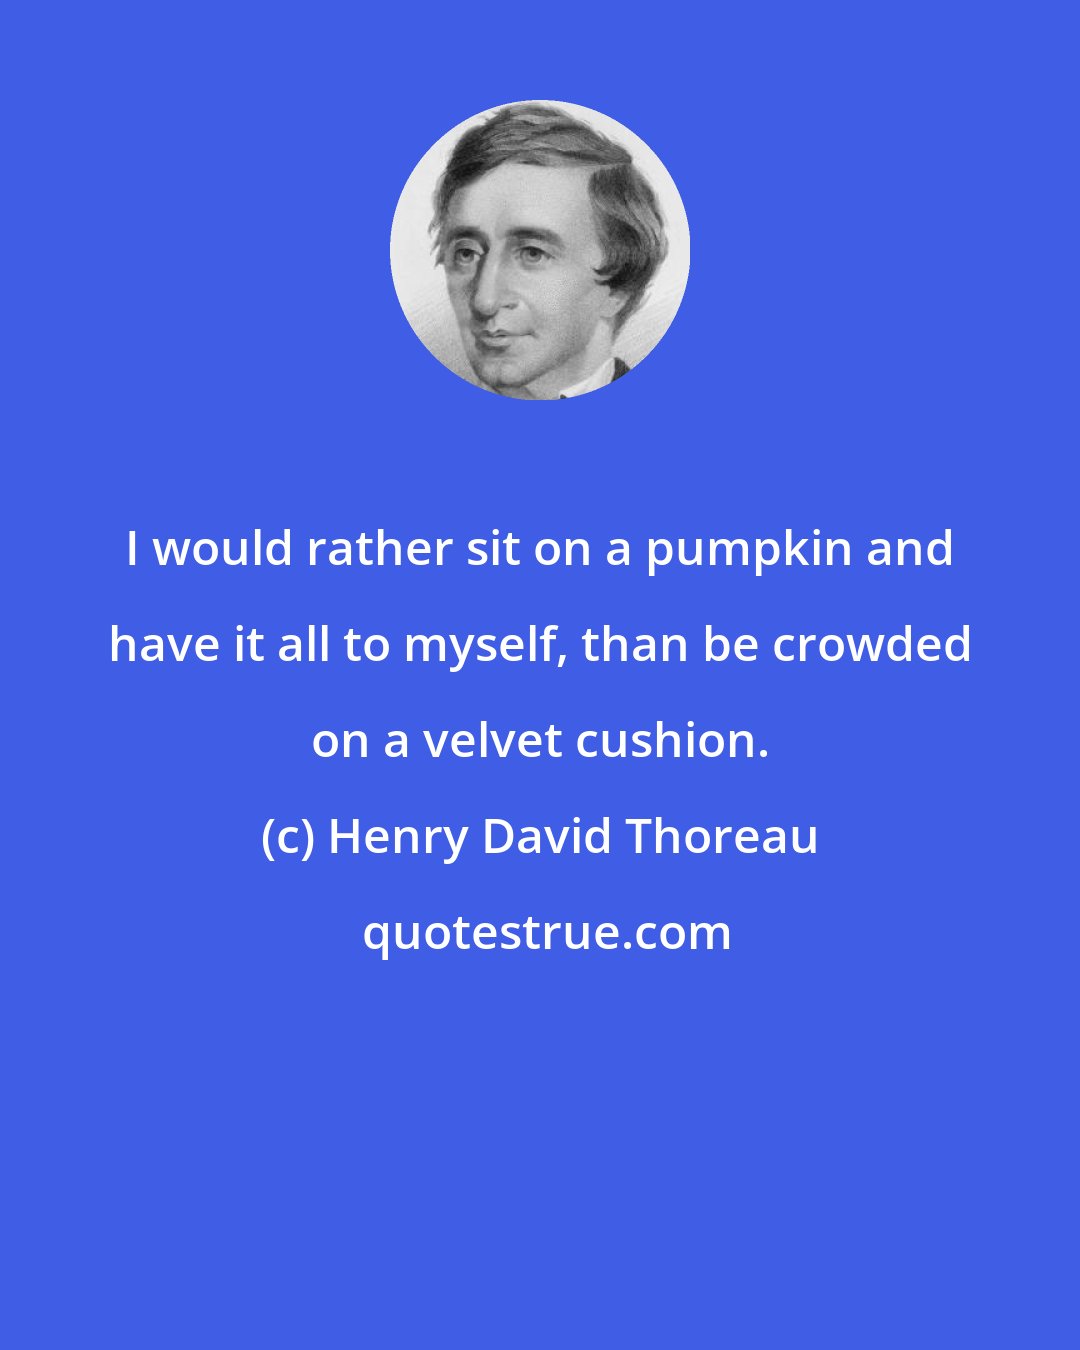 Henry David Thoreau: I would rather sit on a pumpkin and have it all to myself, than be crowded on a velvet cushion.